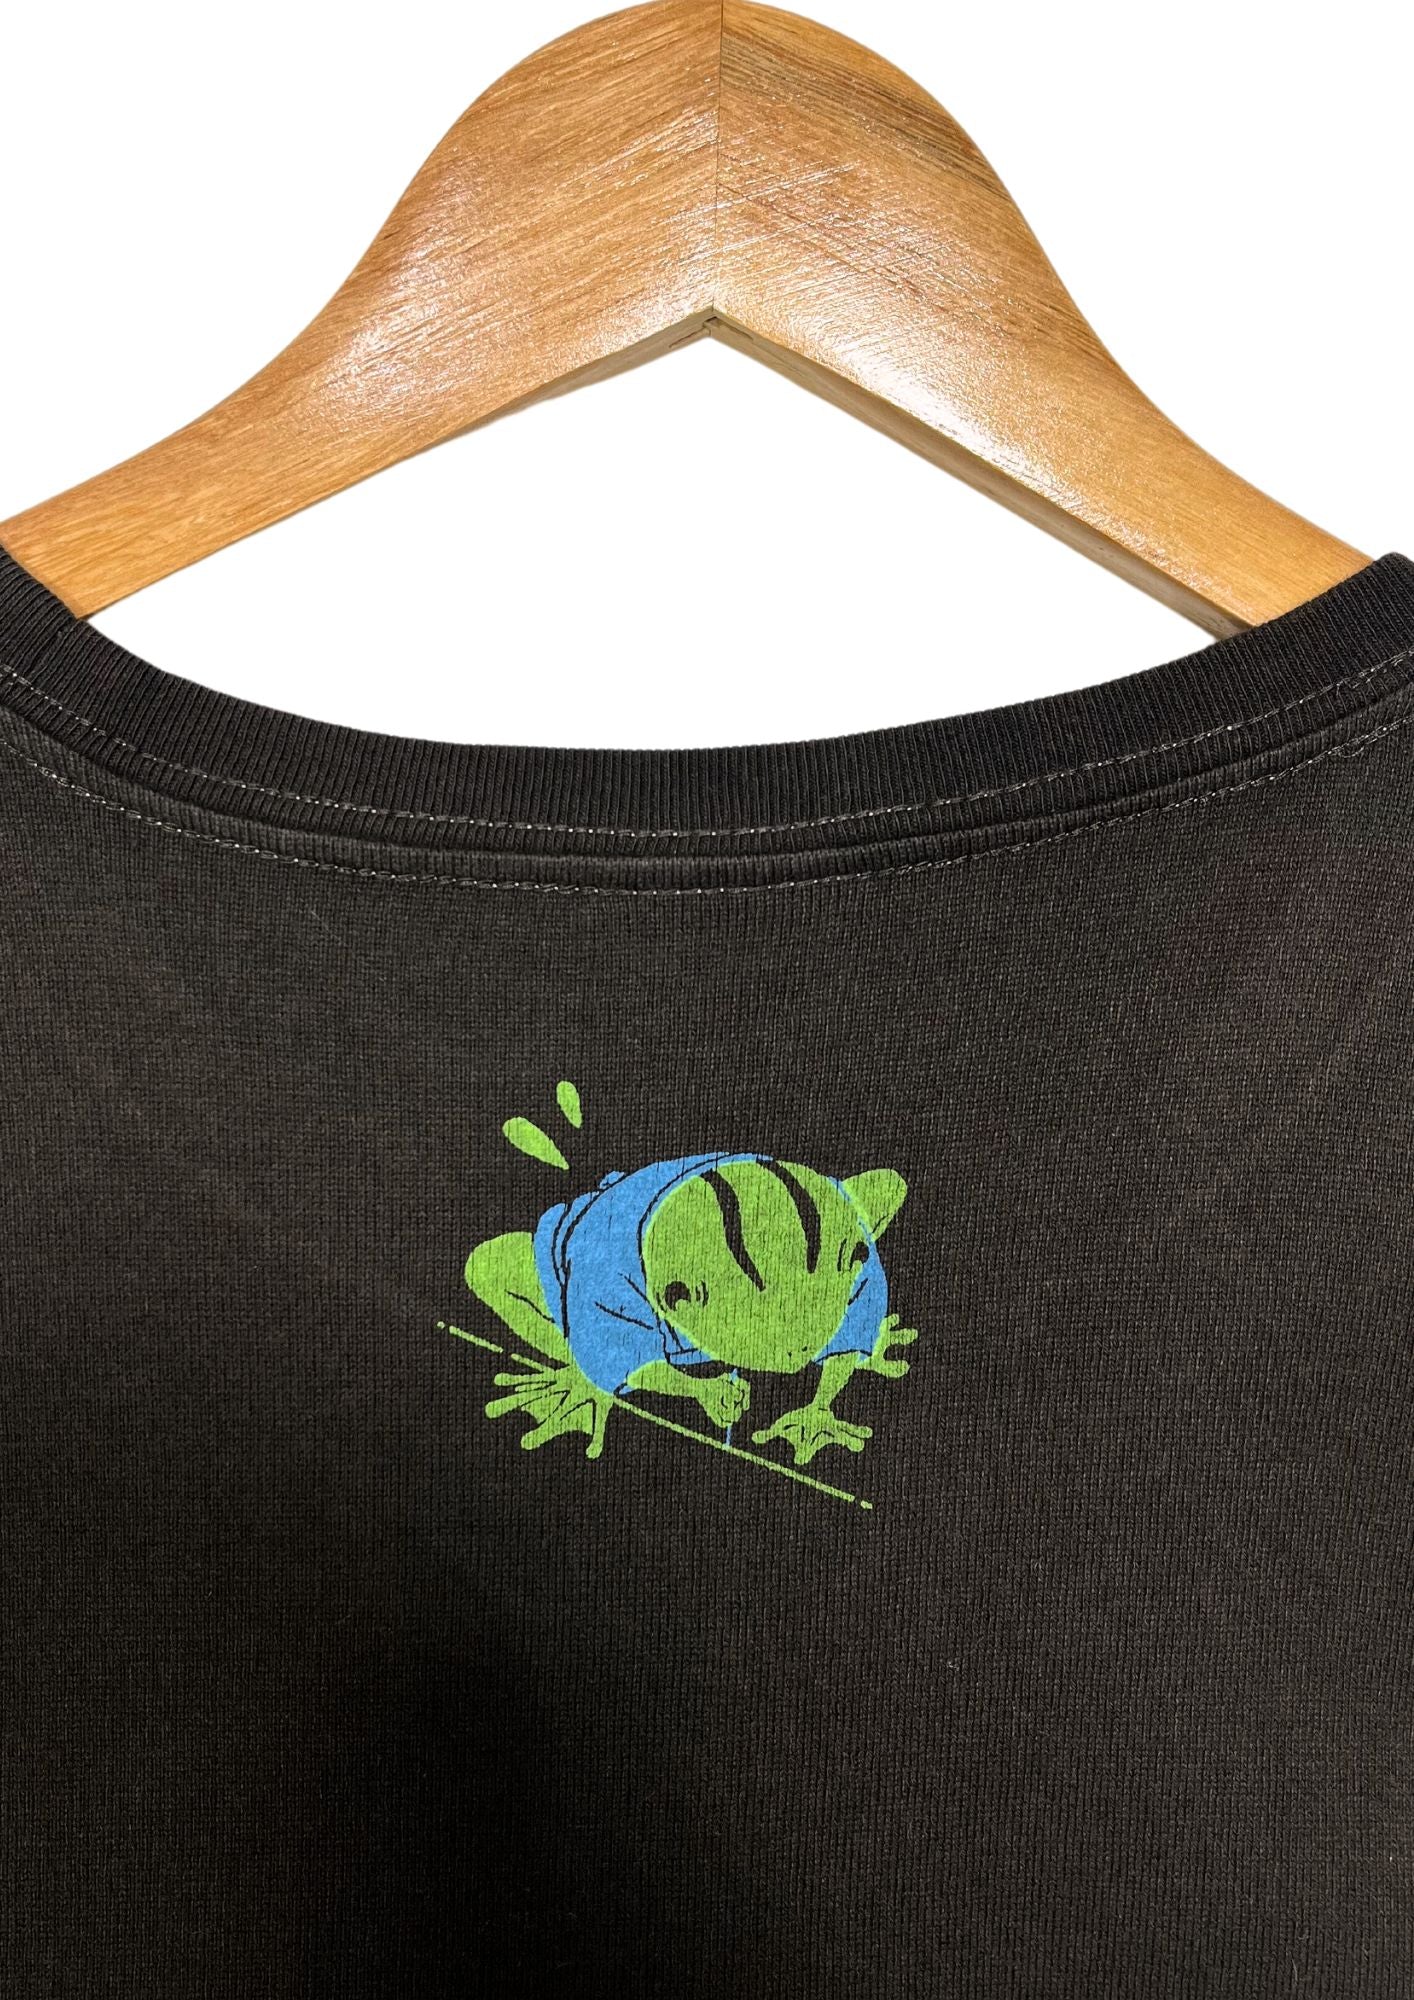 Studio Ghibli Spirited Away x GBL No Face Embroidered T-shirt